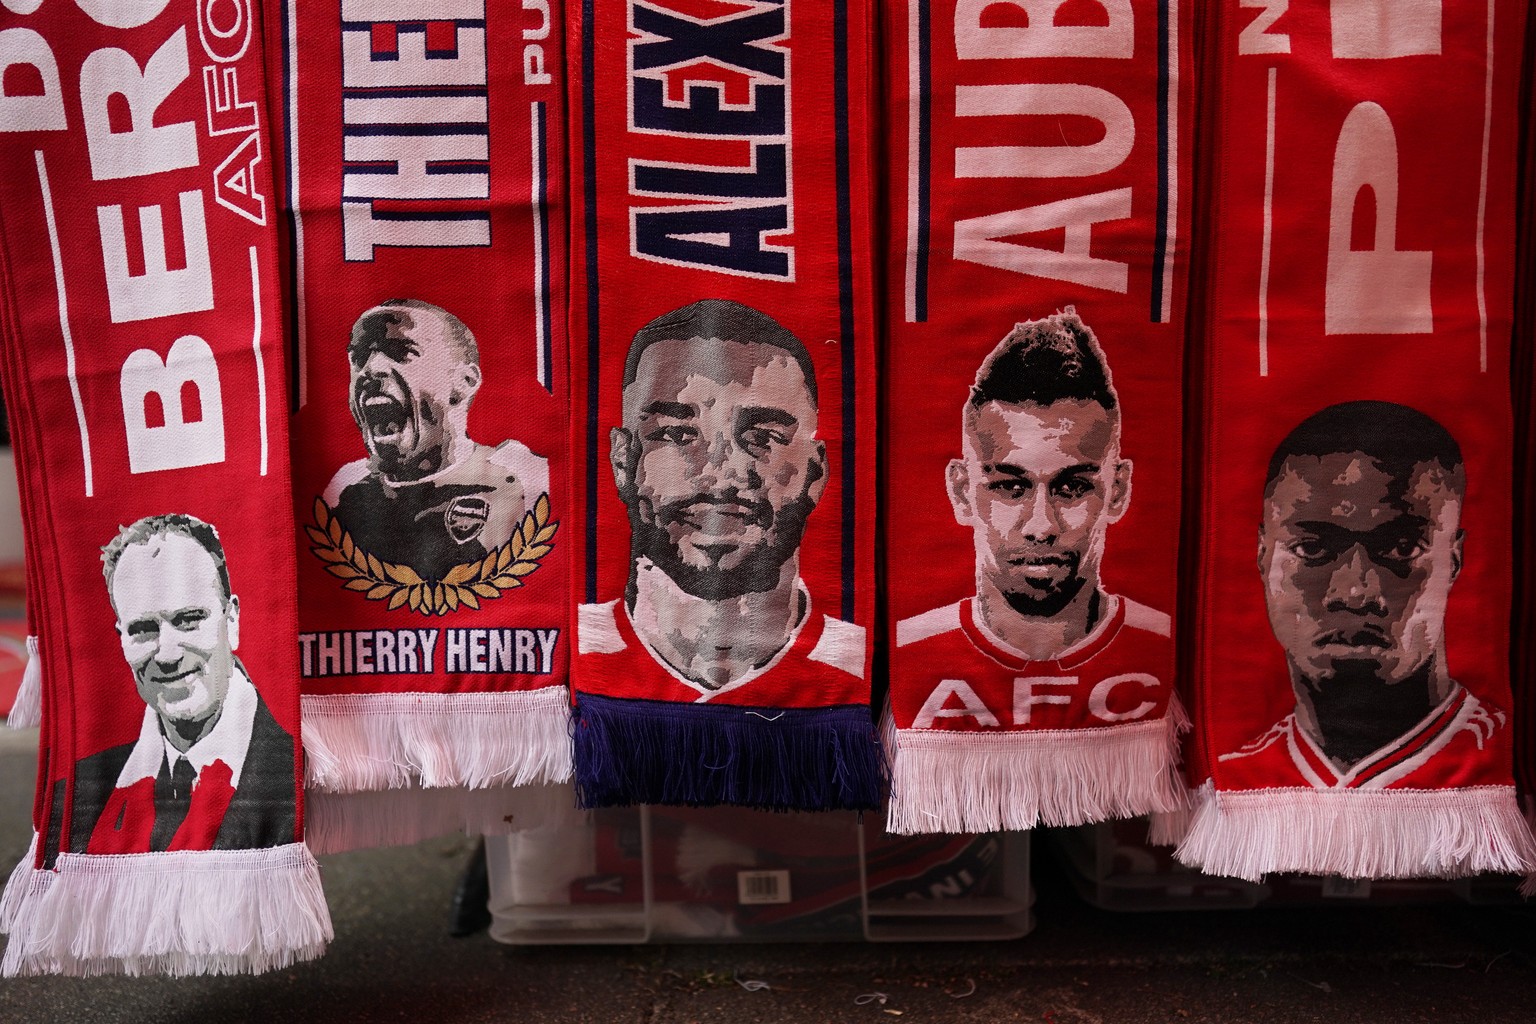 epa07810122 Scarfs on sale ahead of the English Premier League soccer match between Arsenal FC and Tottenham Hotspur in London, Britain, 01 September 2019. EPA/WILL OLIVER EDITORIAL USE ONLY. No use w ...